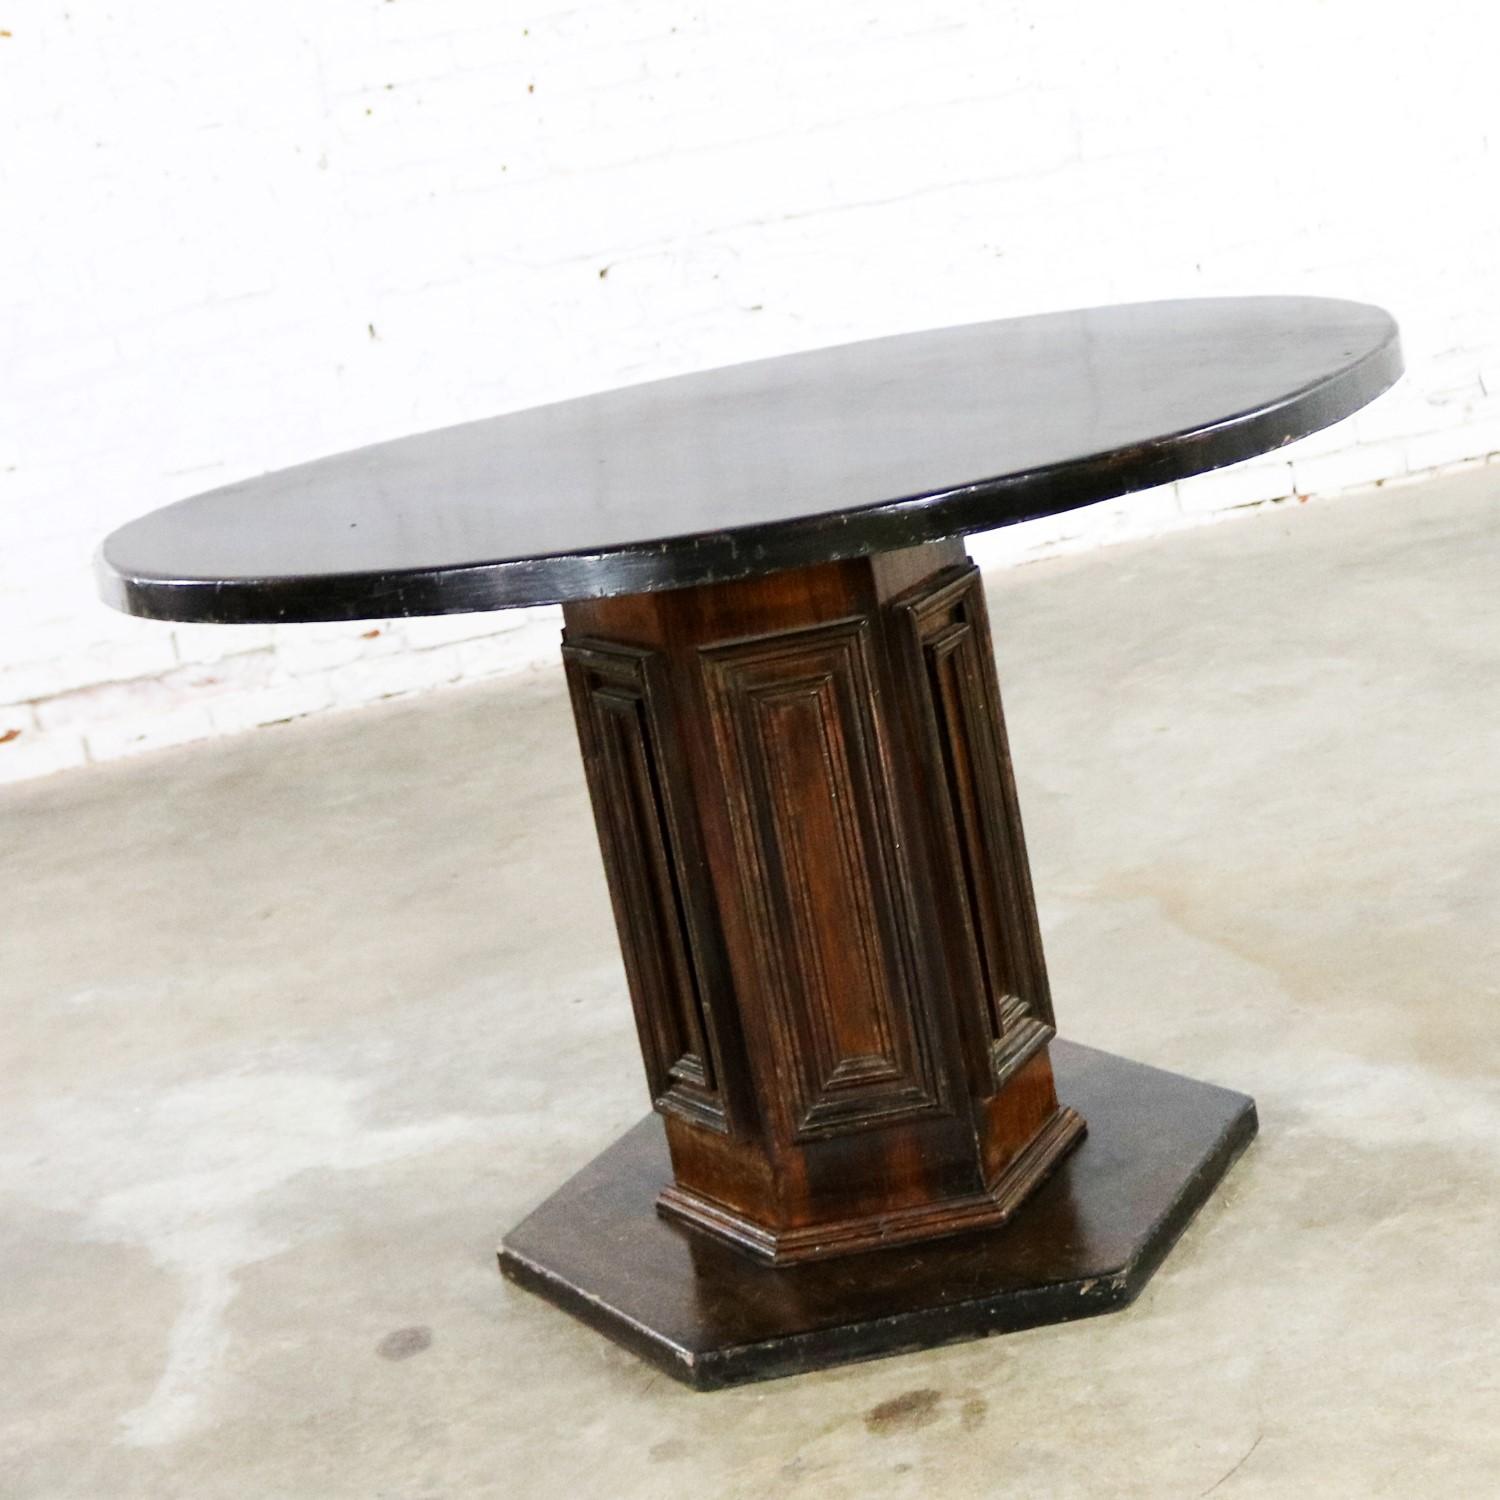 Spanish Colonial Spanish Revival Style Round Dining Table Single Pedestal Artes de Mexico